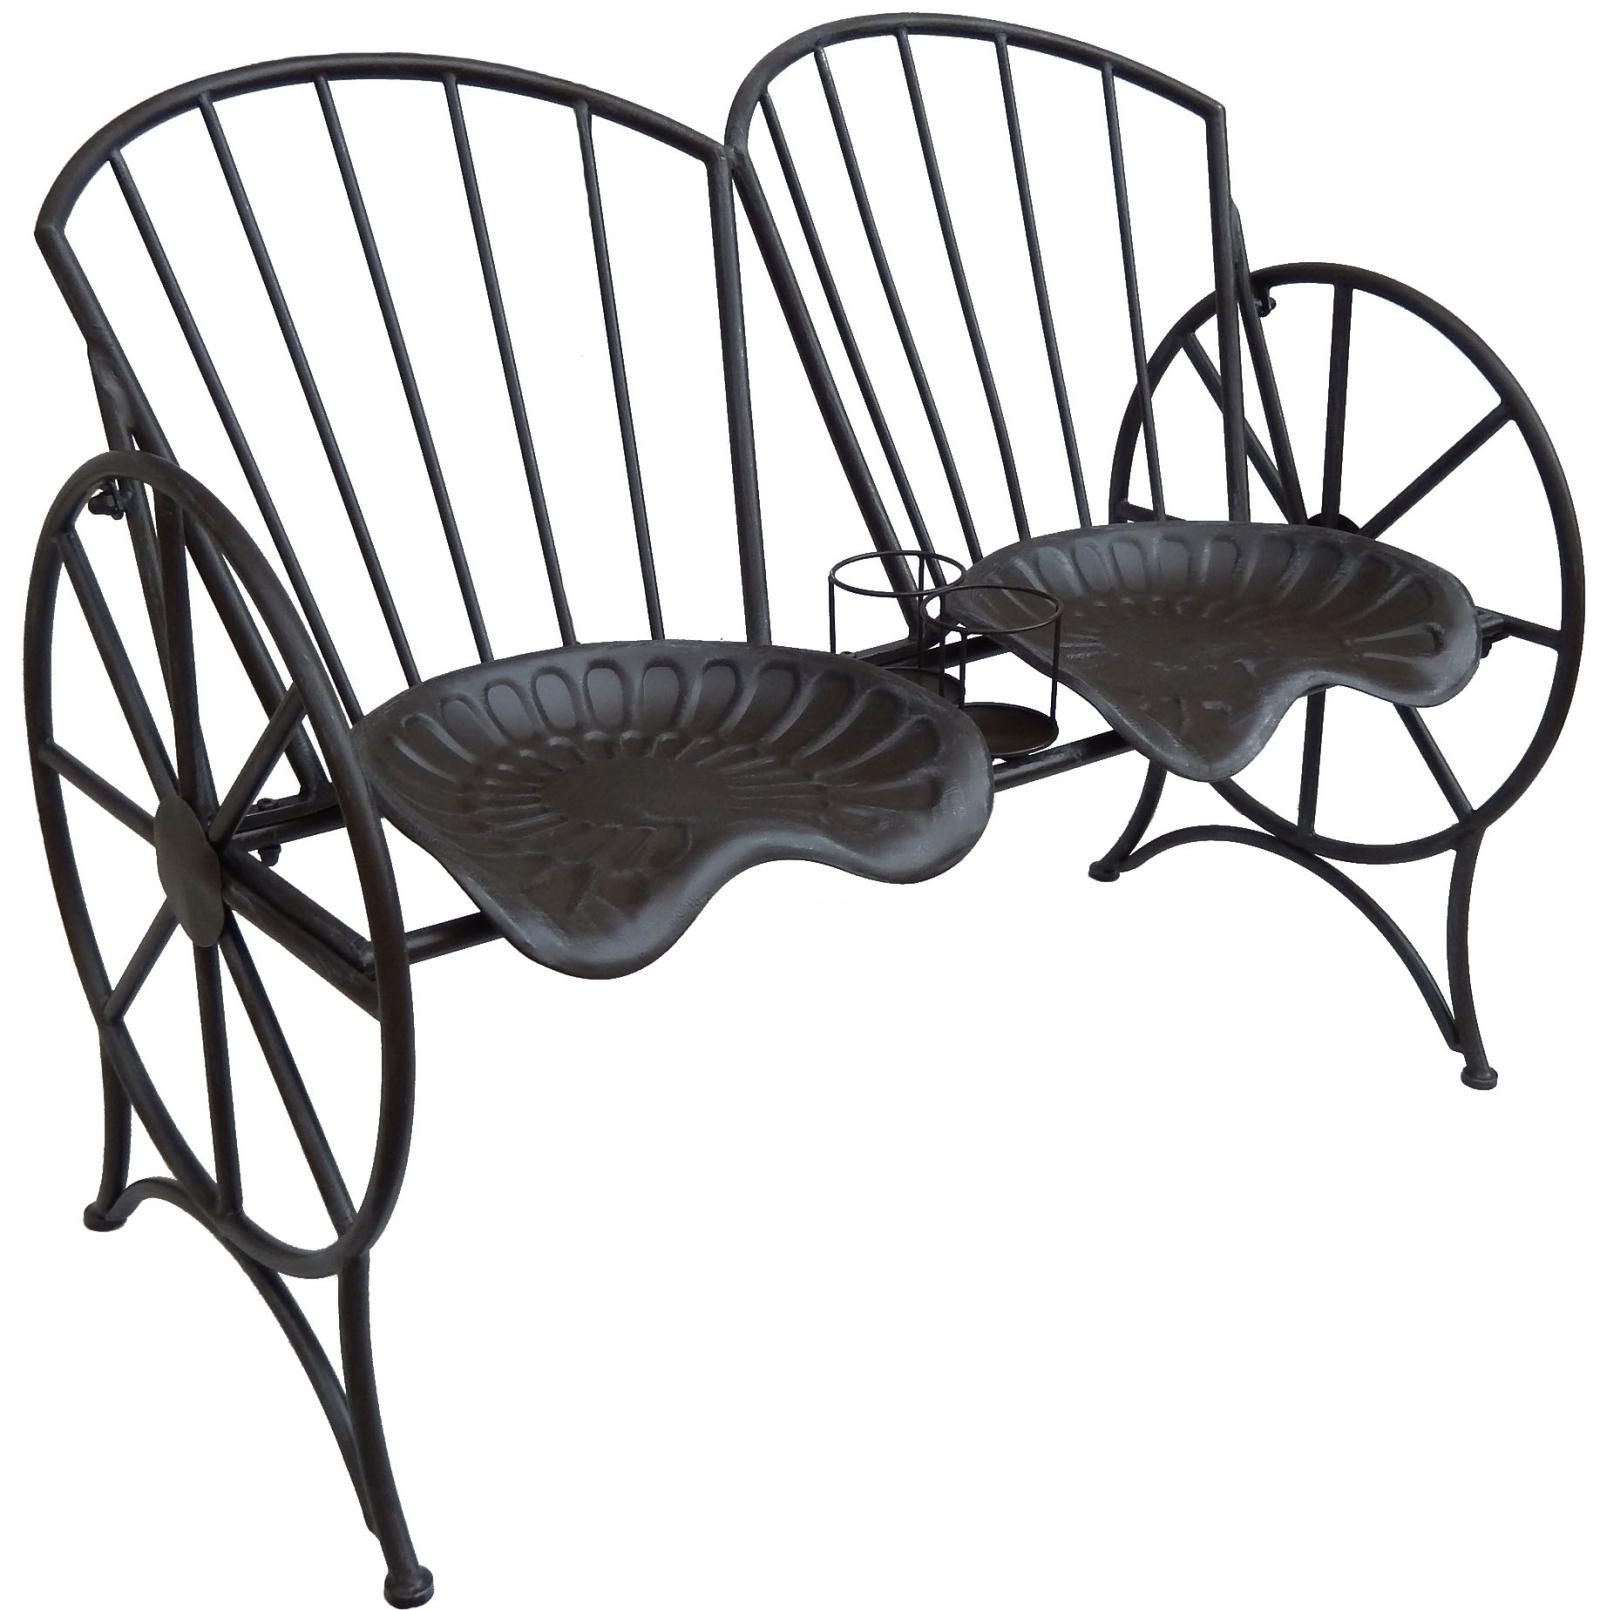 Backyard Expressions Double Tractor Seat Bench